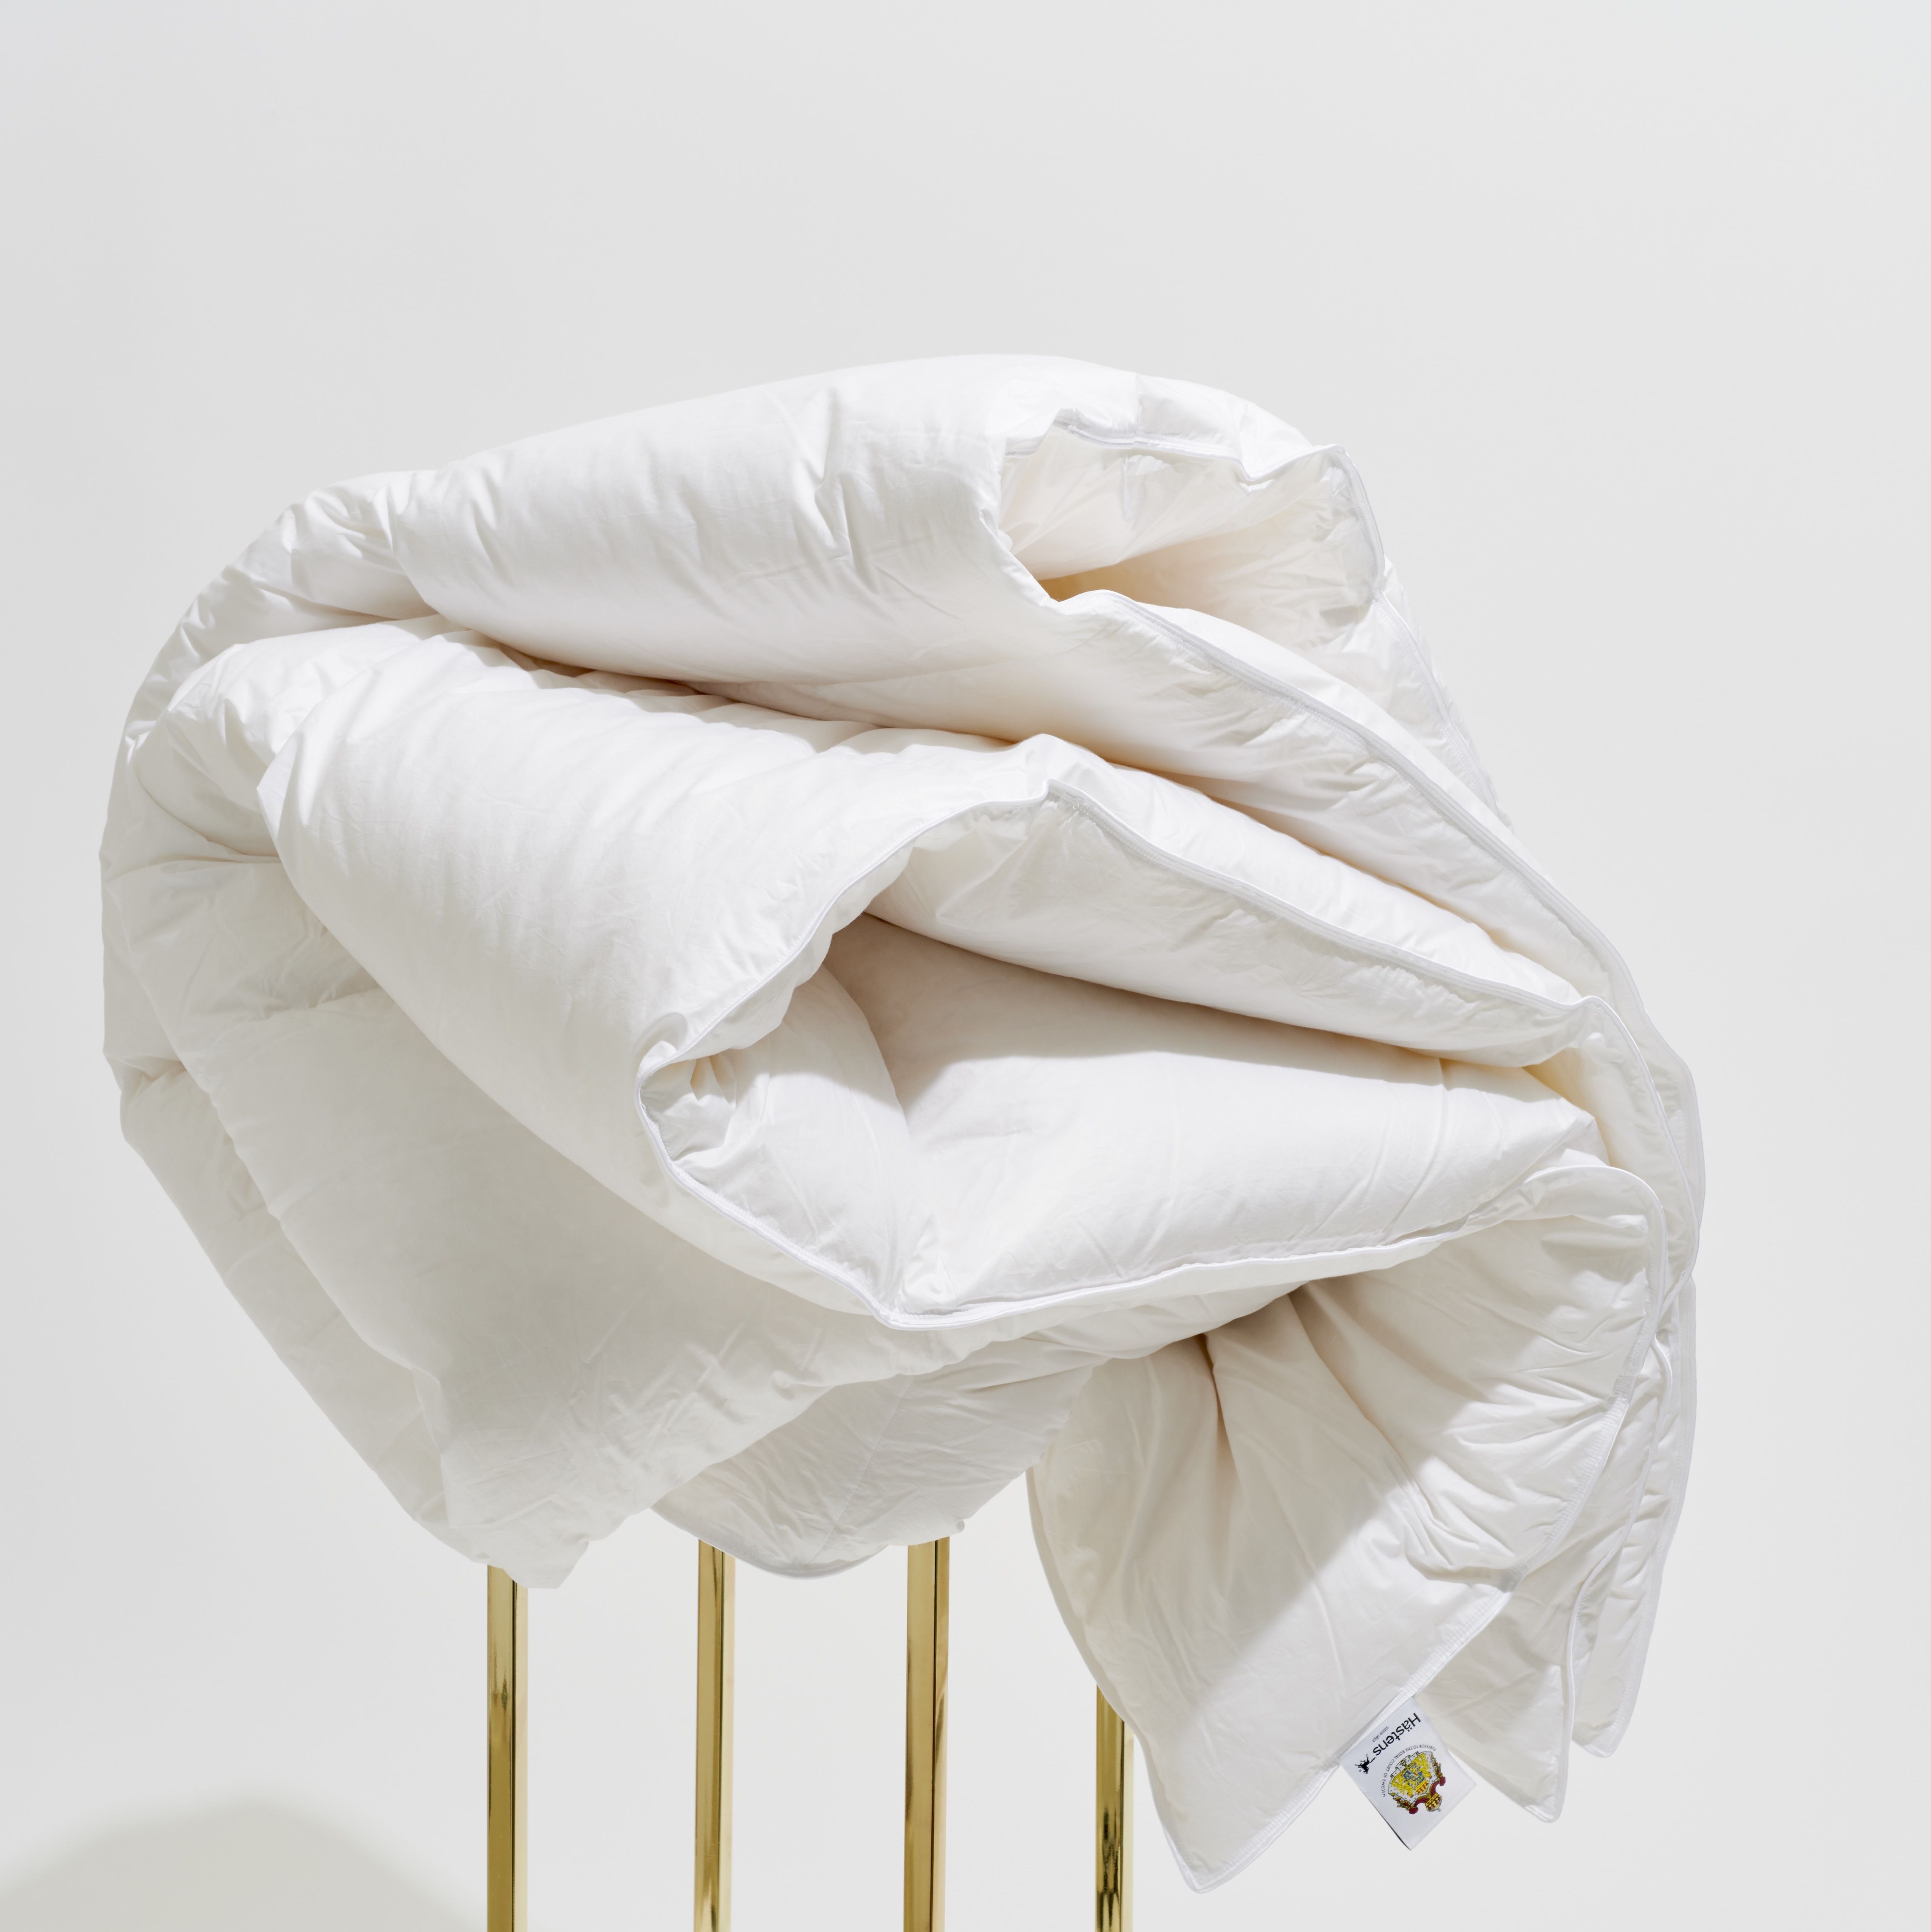 The Most Luxurious Duvet Ever Made